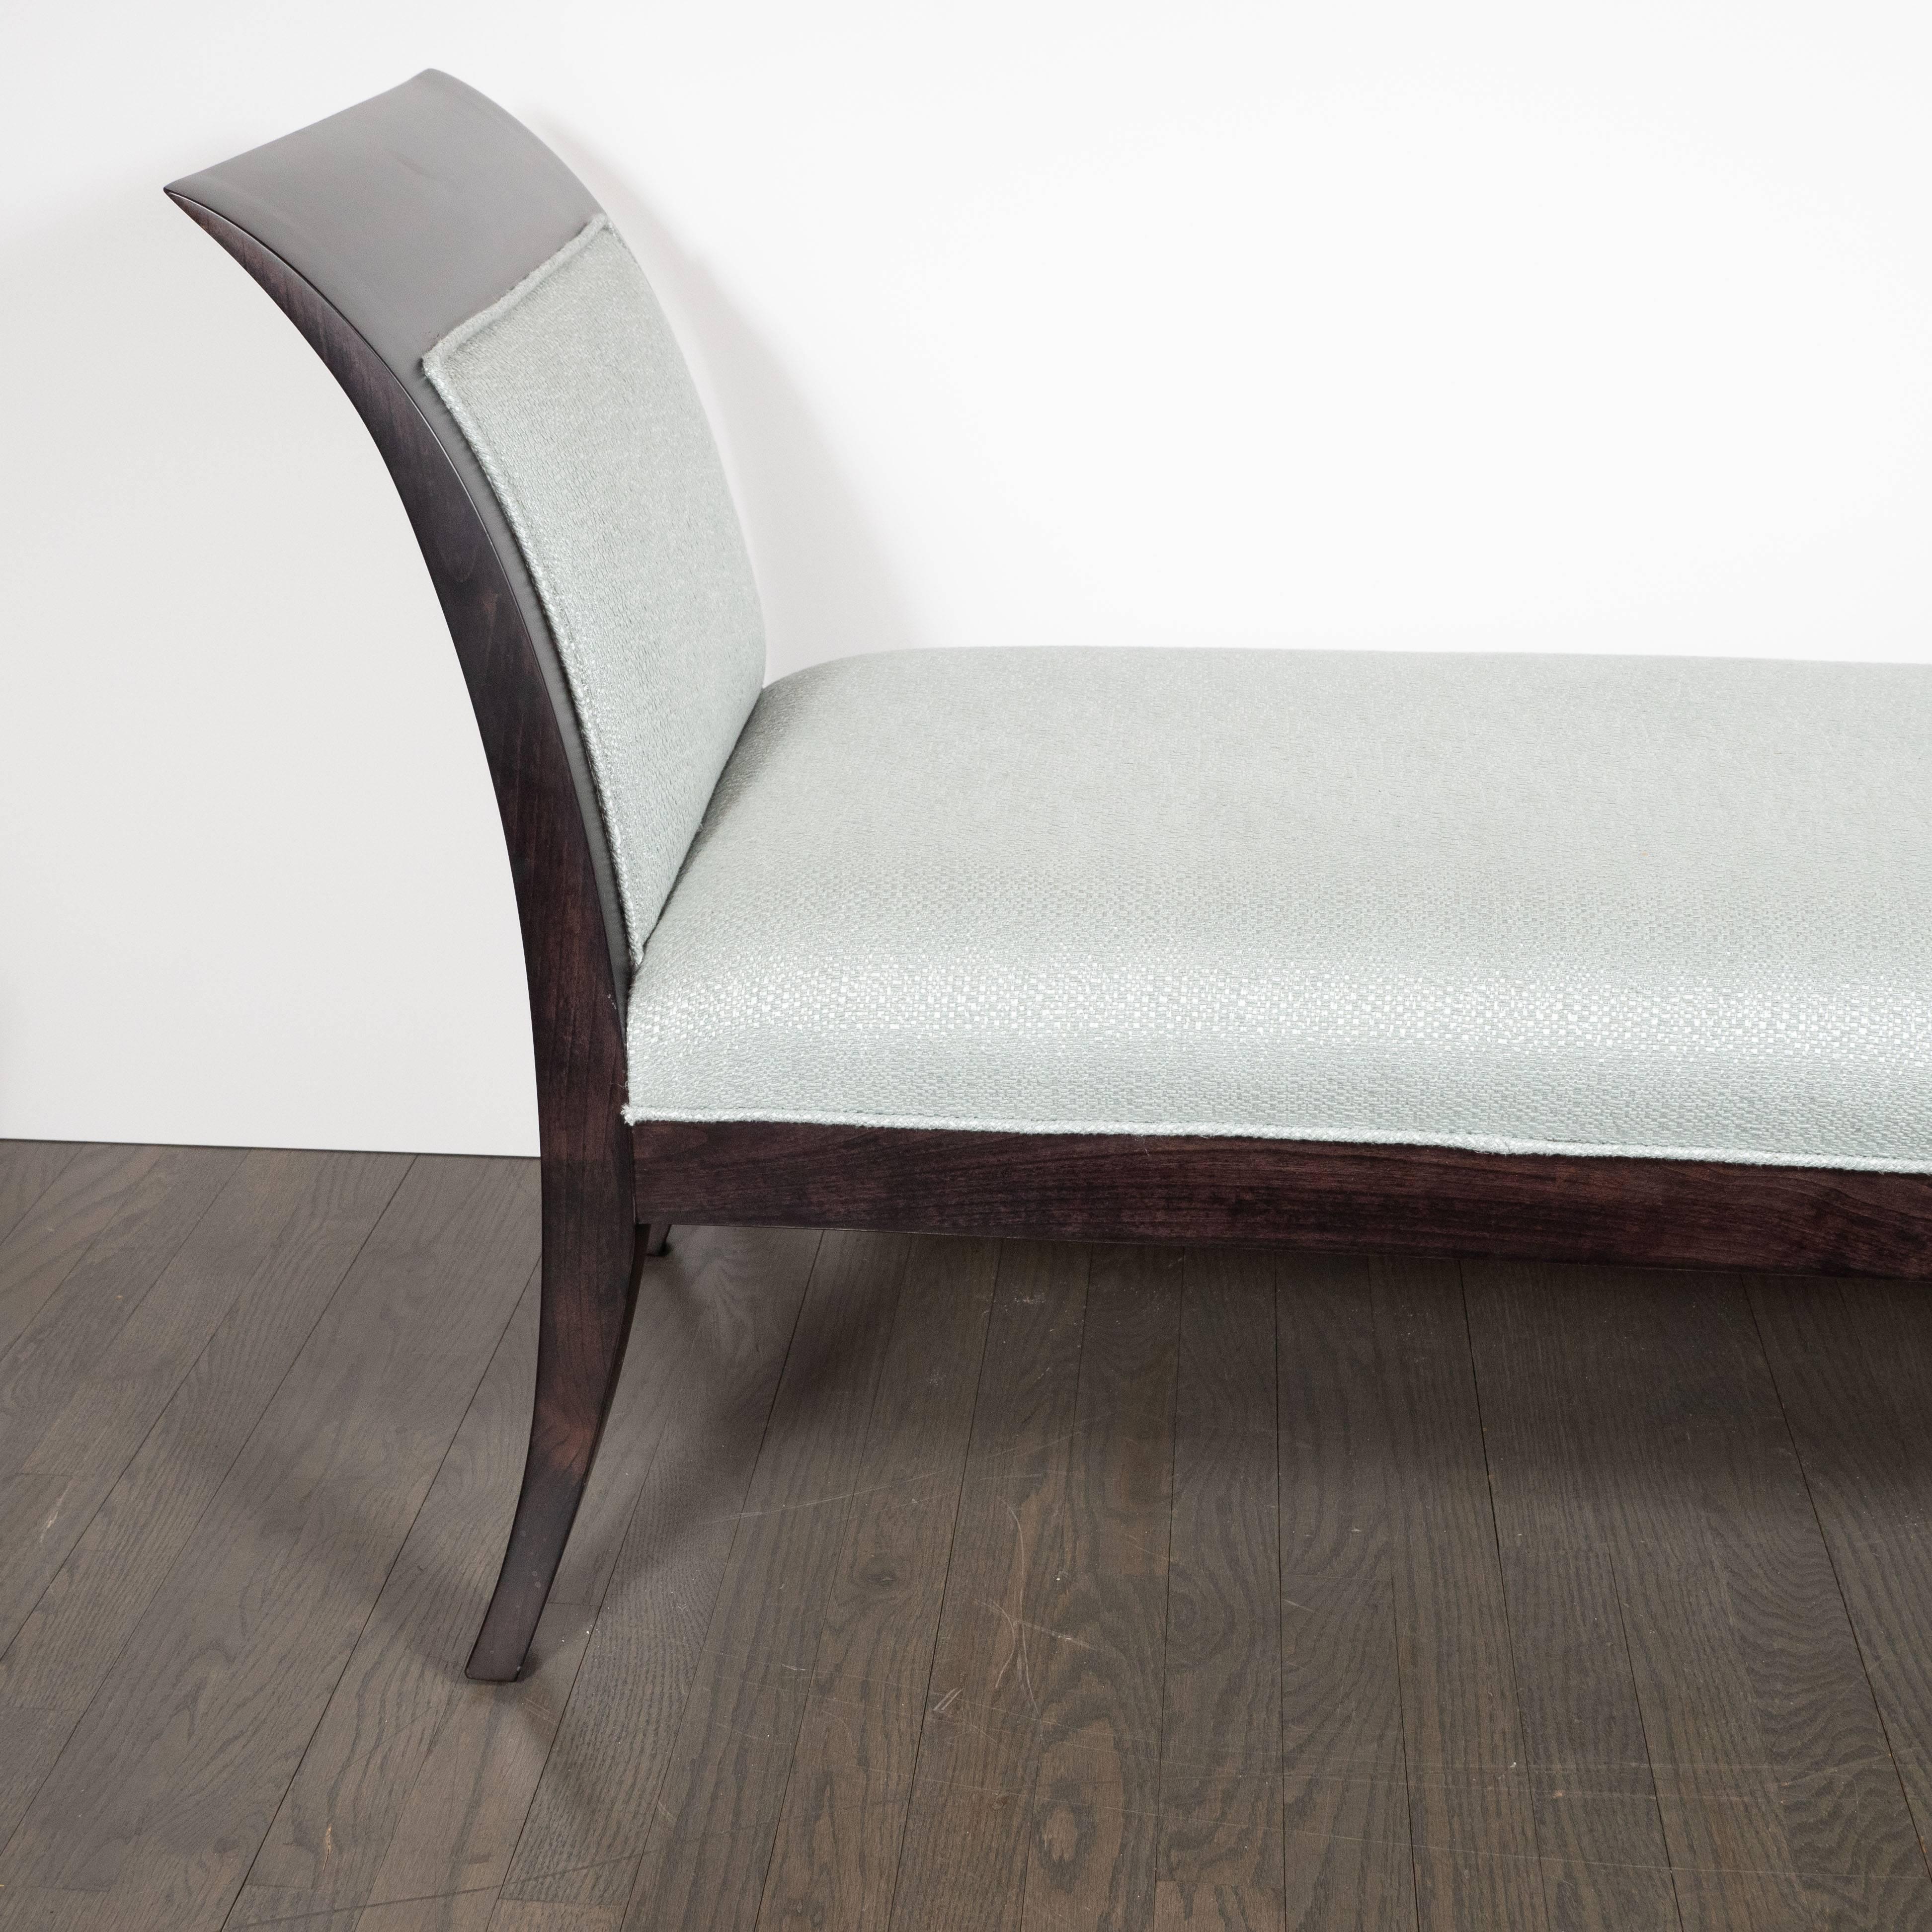 This sophisticated Mid-Century Modern bench features two streamlined sides in the United States, circa 1950. The bowed form of each side is reiterated in palindromic symmetry in the saber style legs upon which it rests, all realized in ebonized